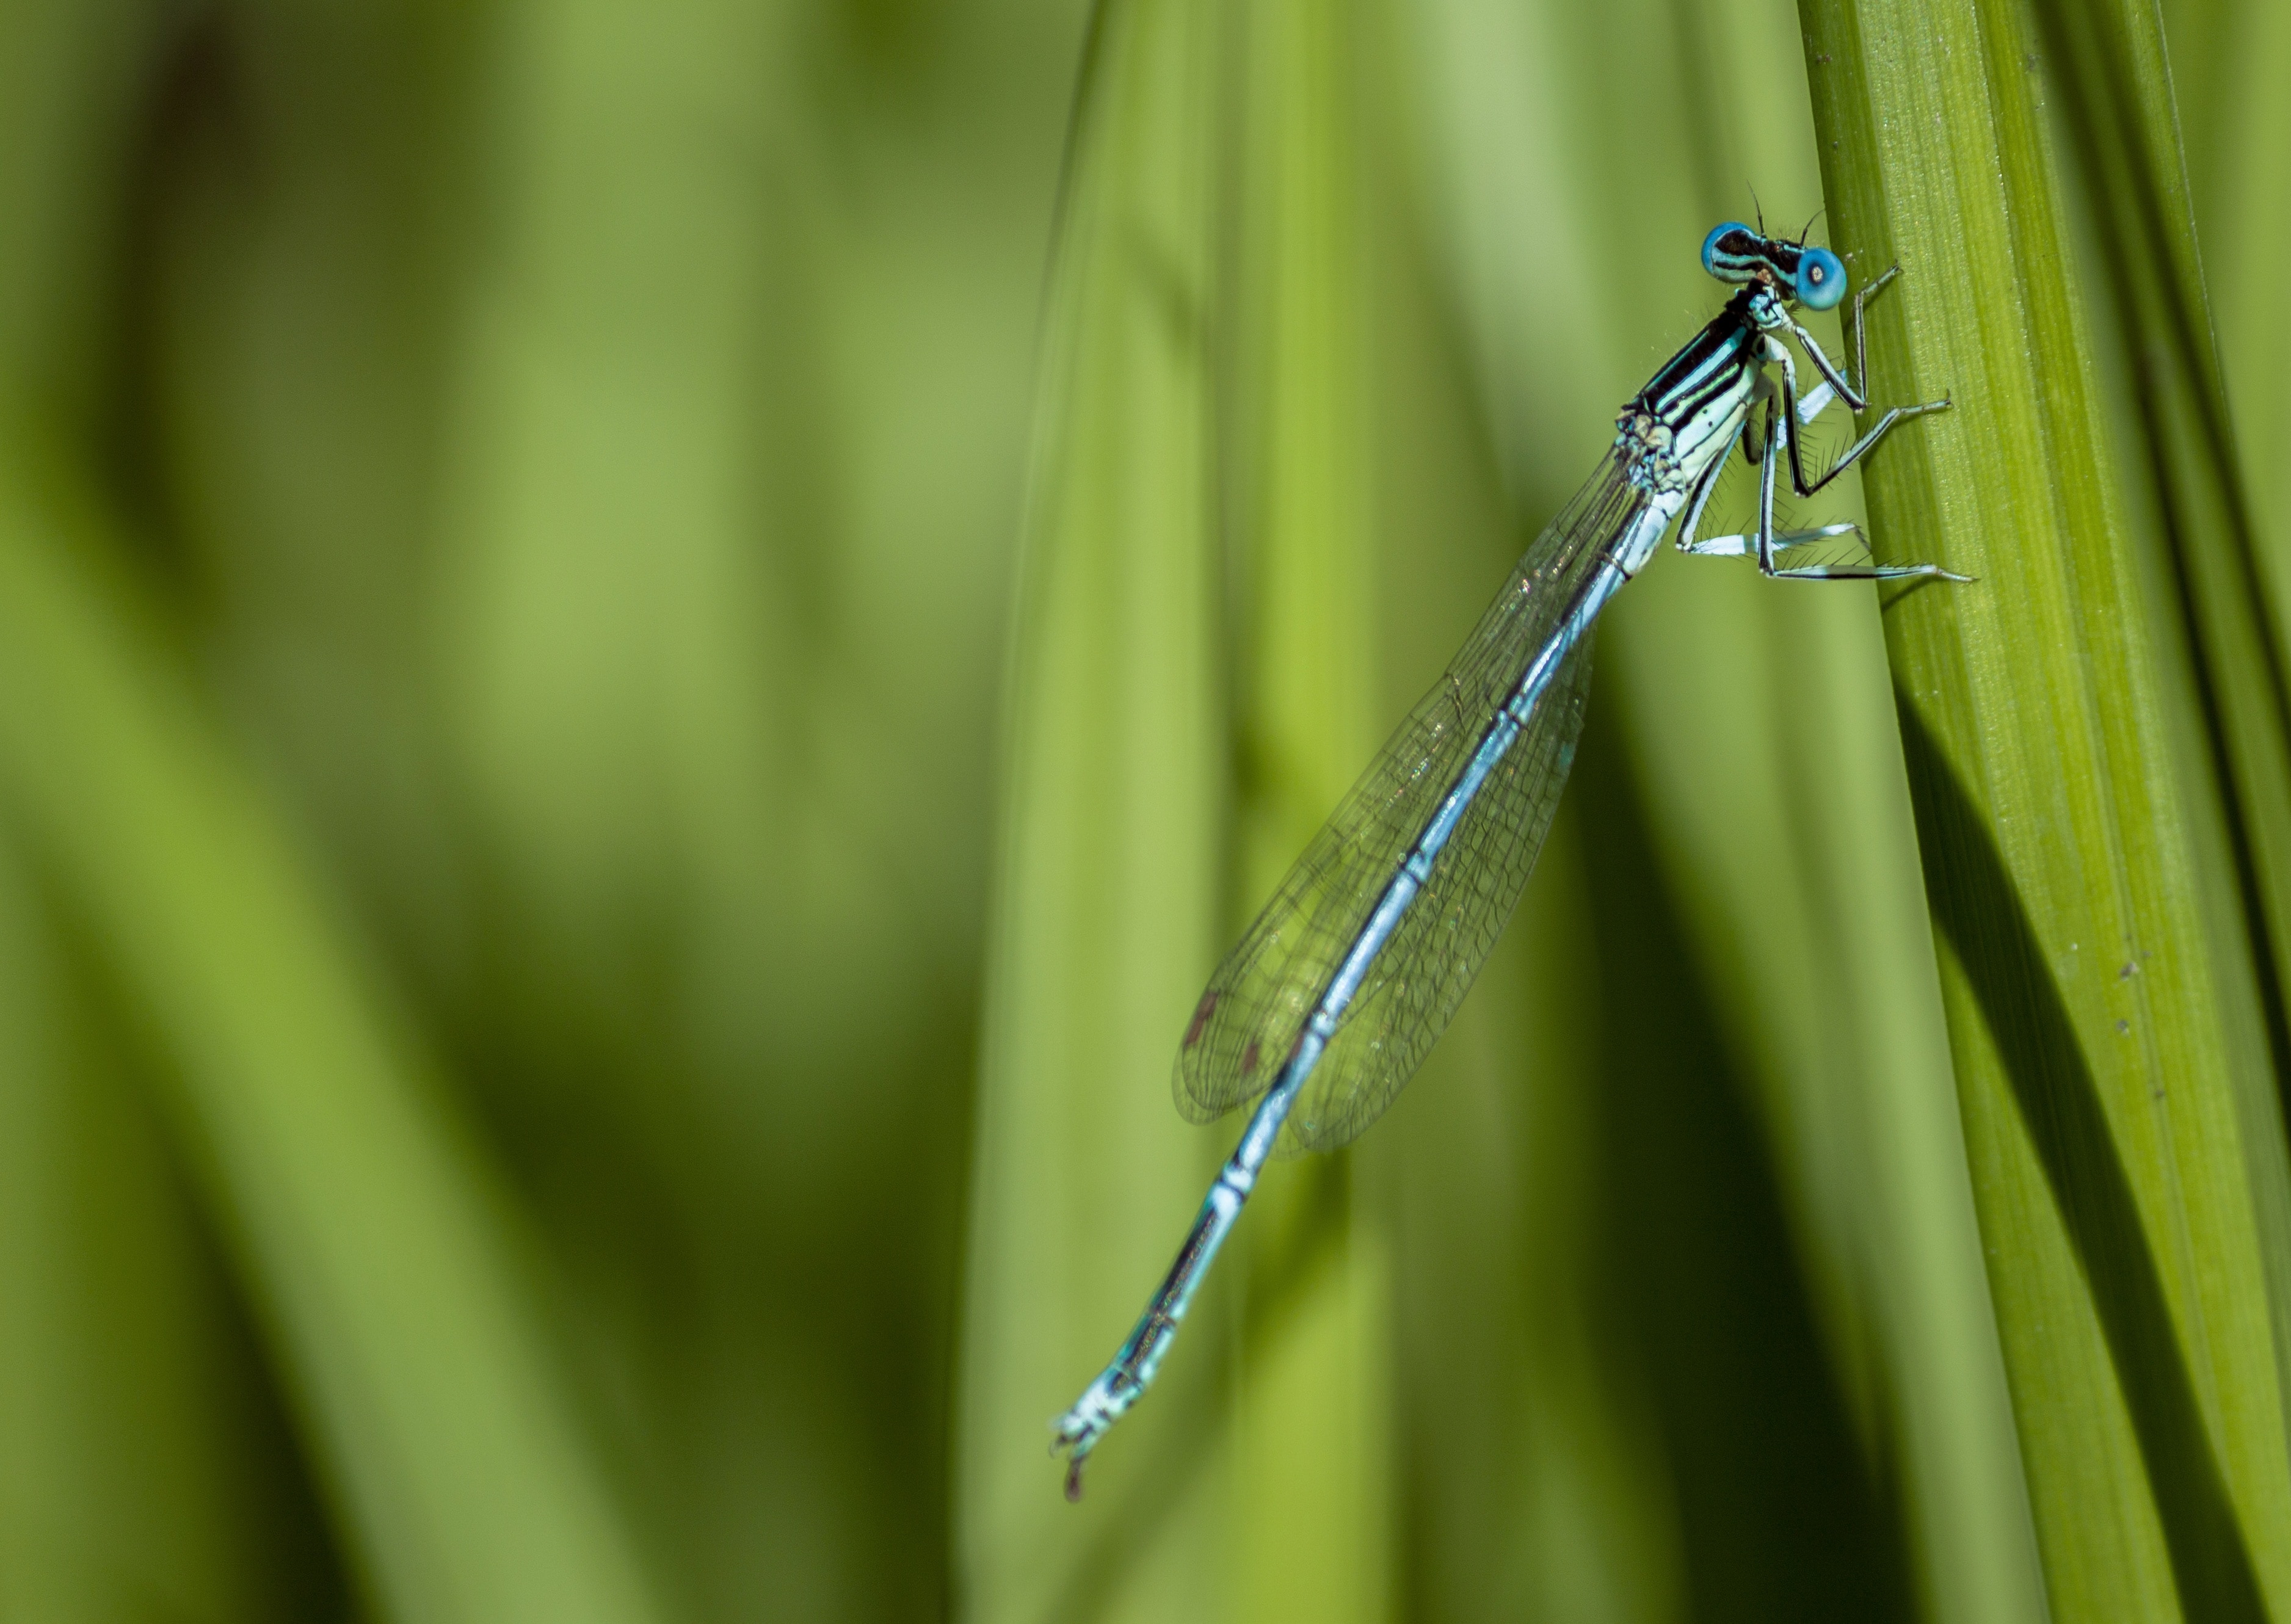 Insect, Nature, Dragonfly, Detail, Green, green color, damselfly